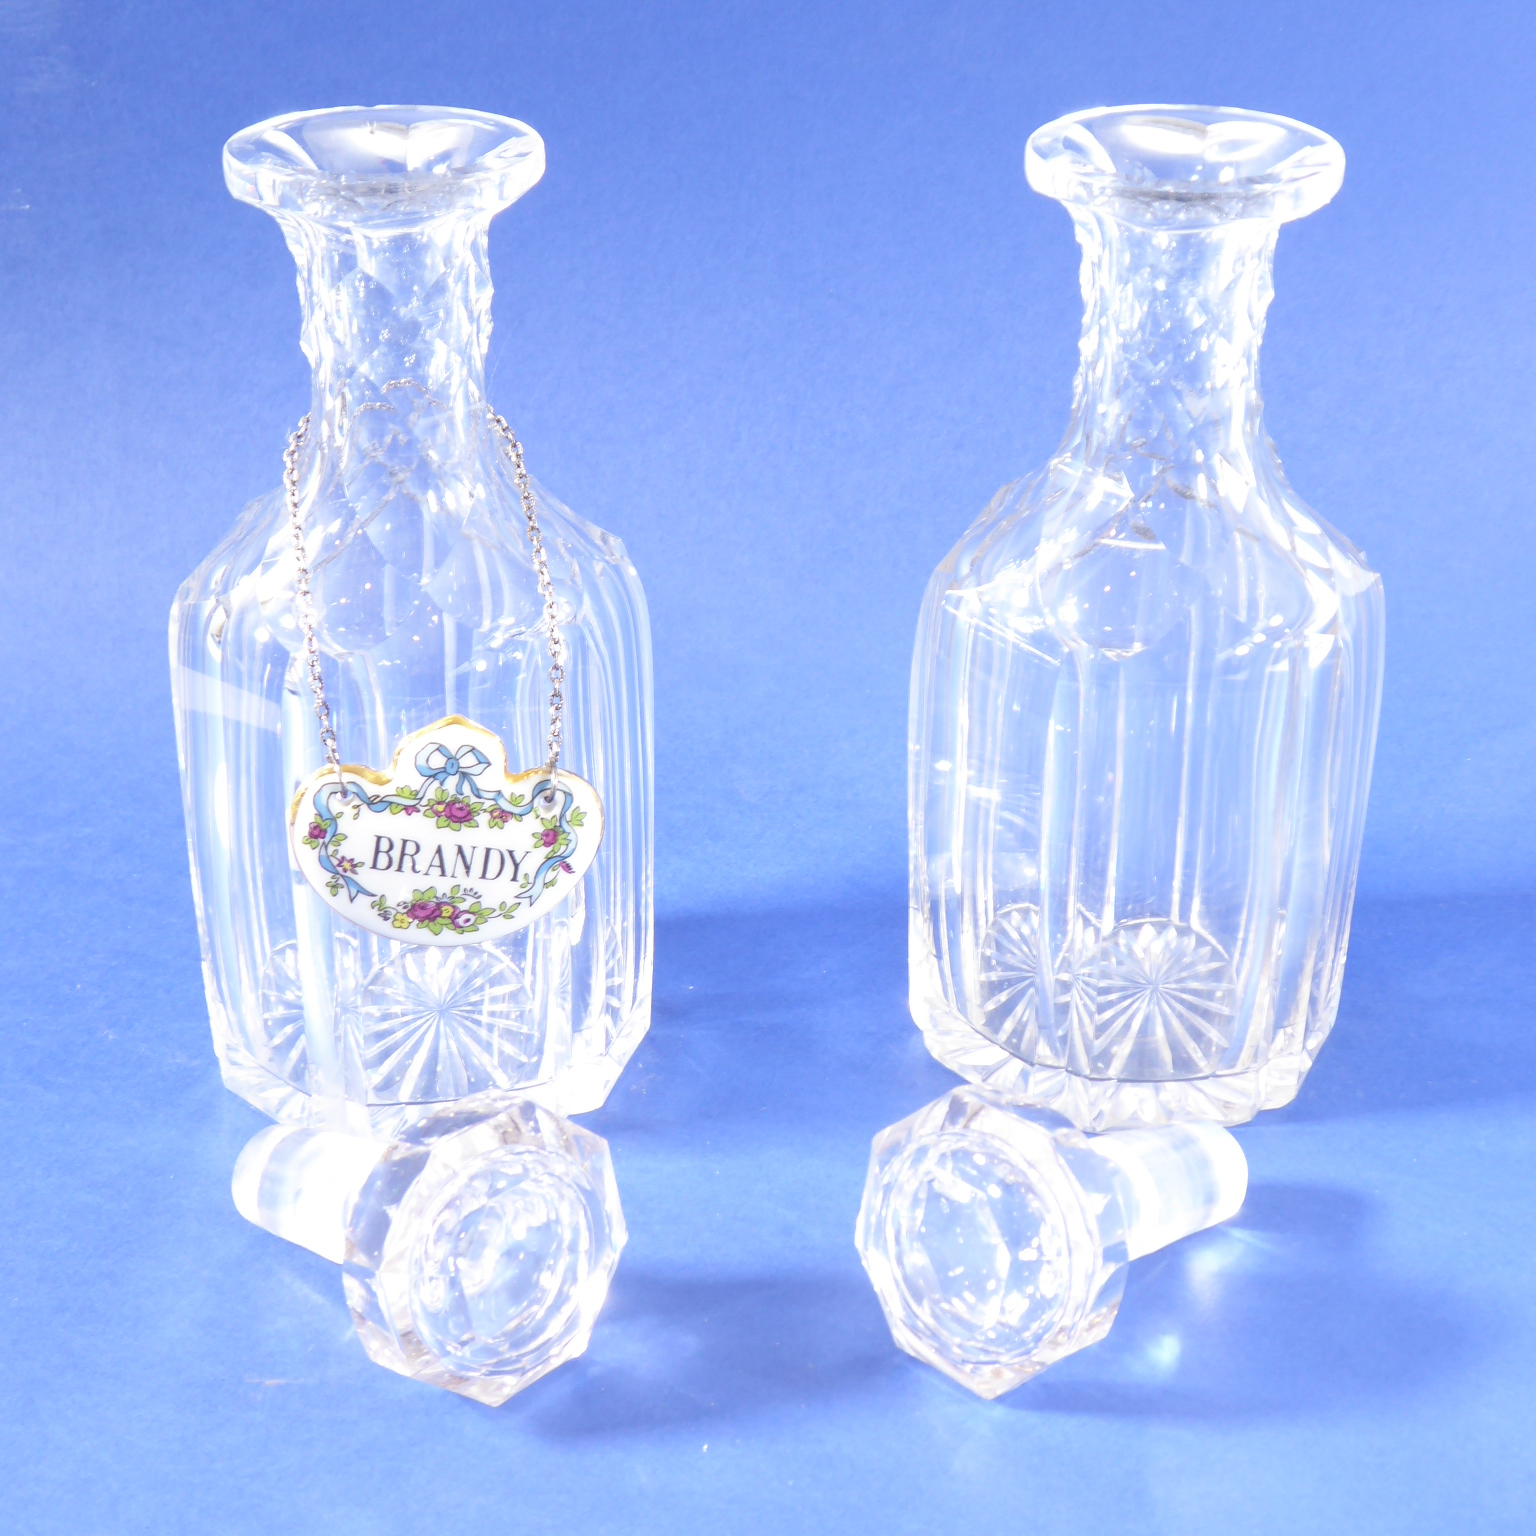 A pair of hexagonal cut-glass decanters (one with Crown Staffordshire 'Brandy' label), together with - Image 4 of 4